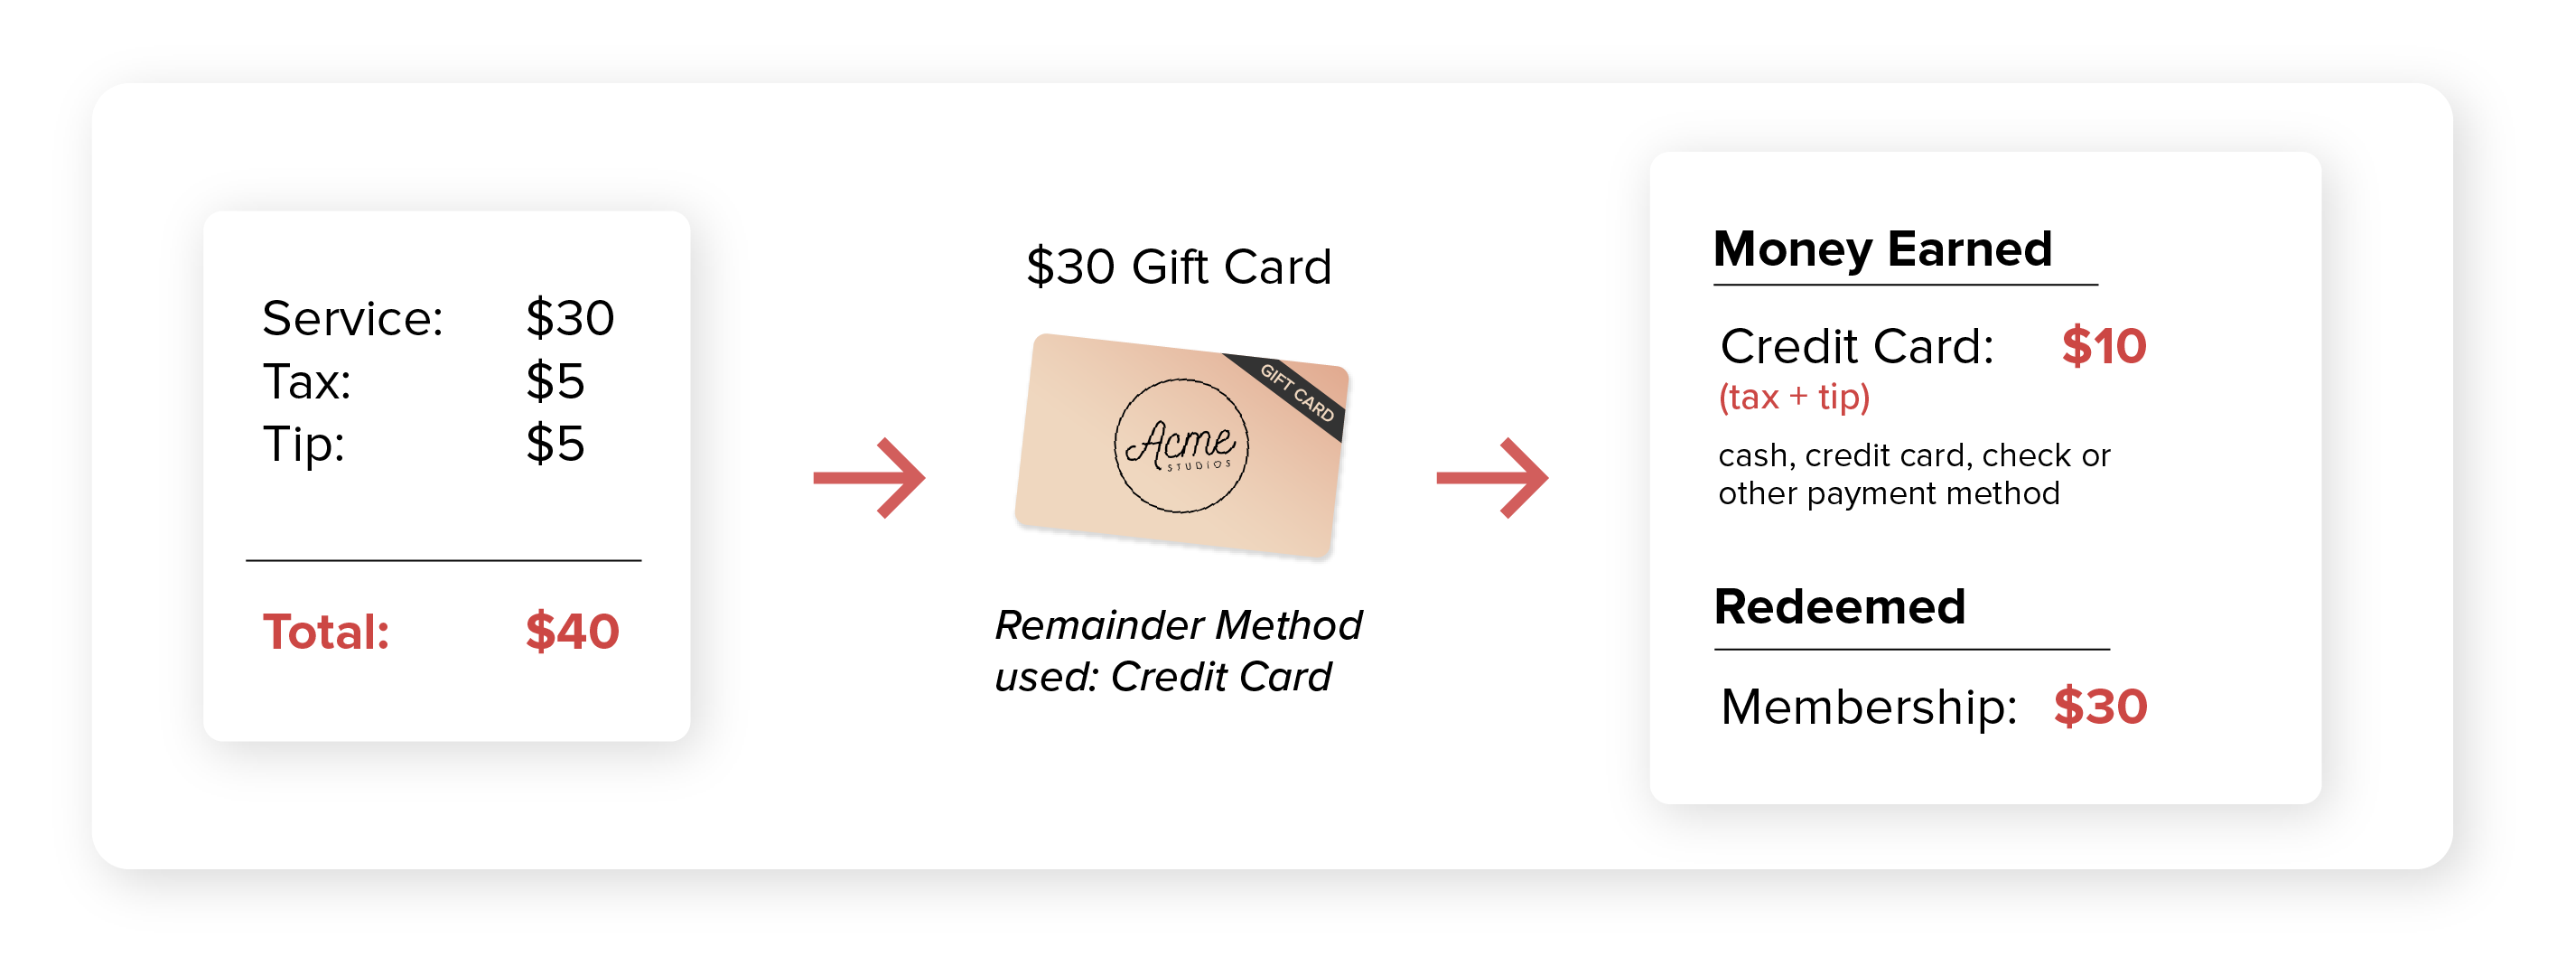 gift_card_service_based.png